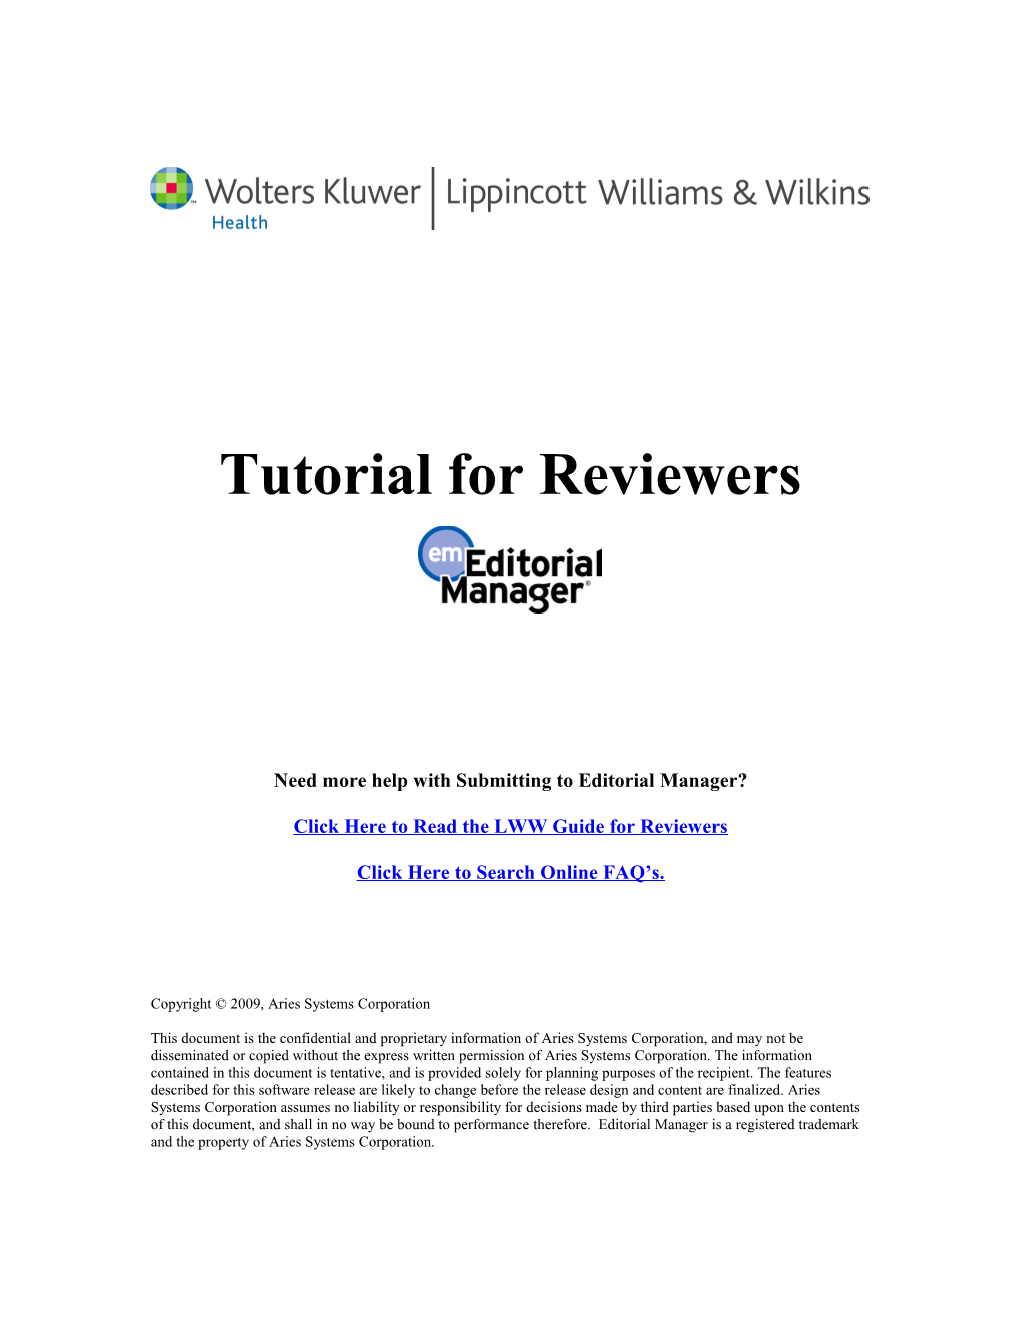 Lwweditorial Manager - Tutorial for Reviewers